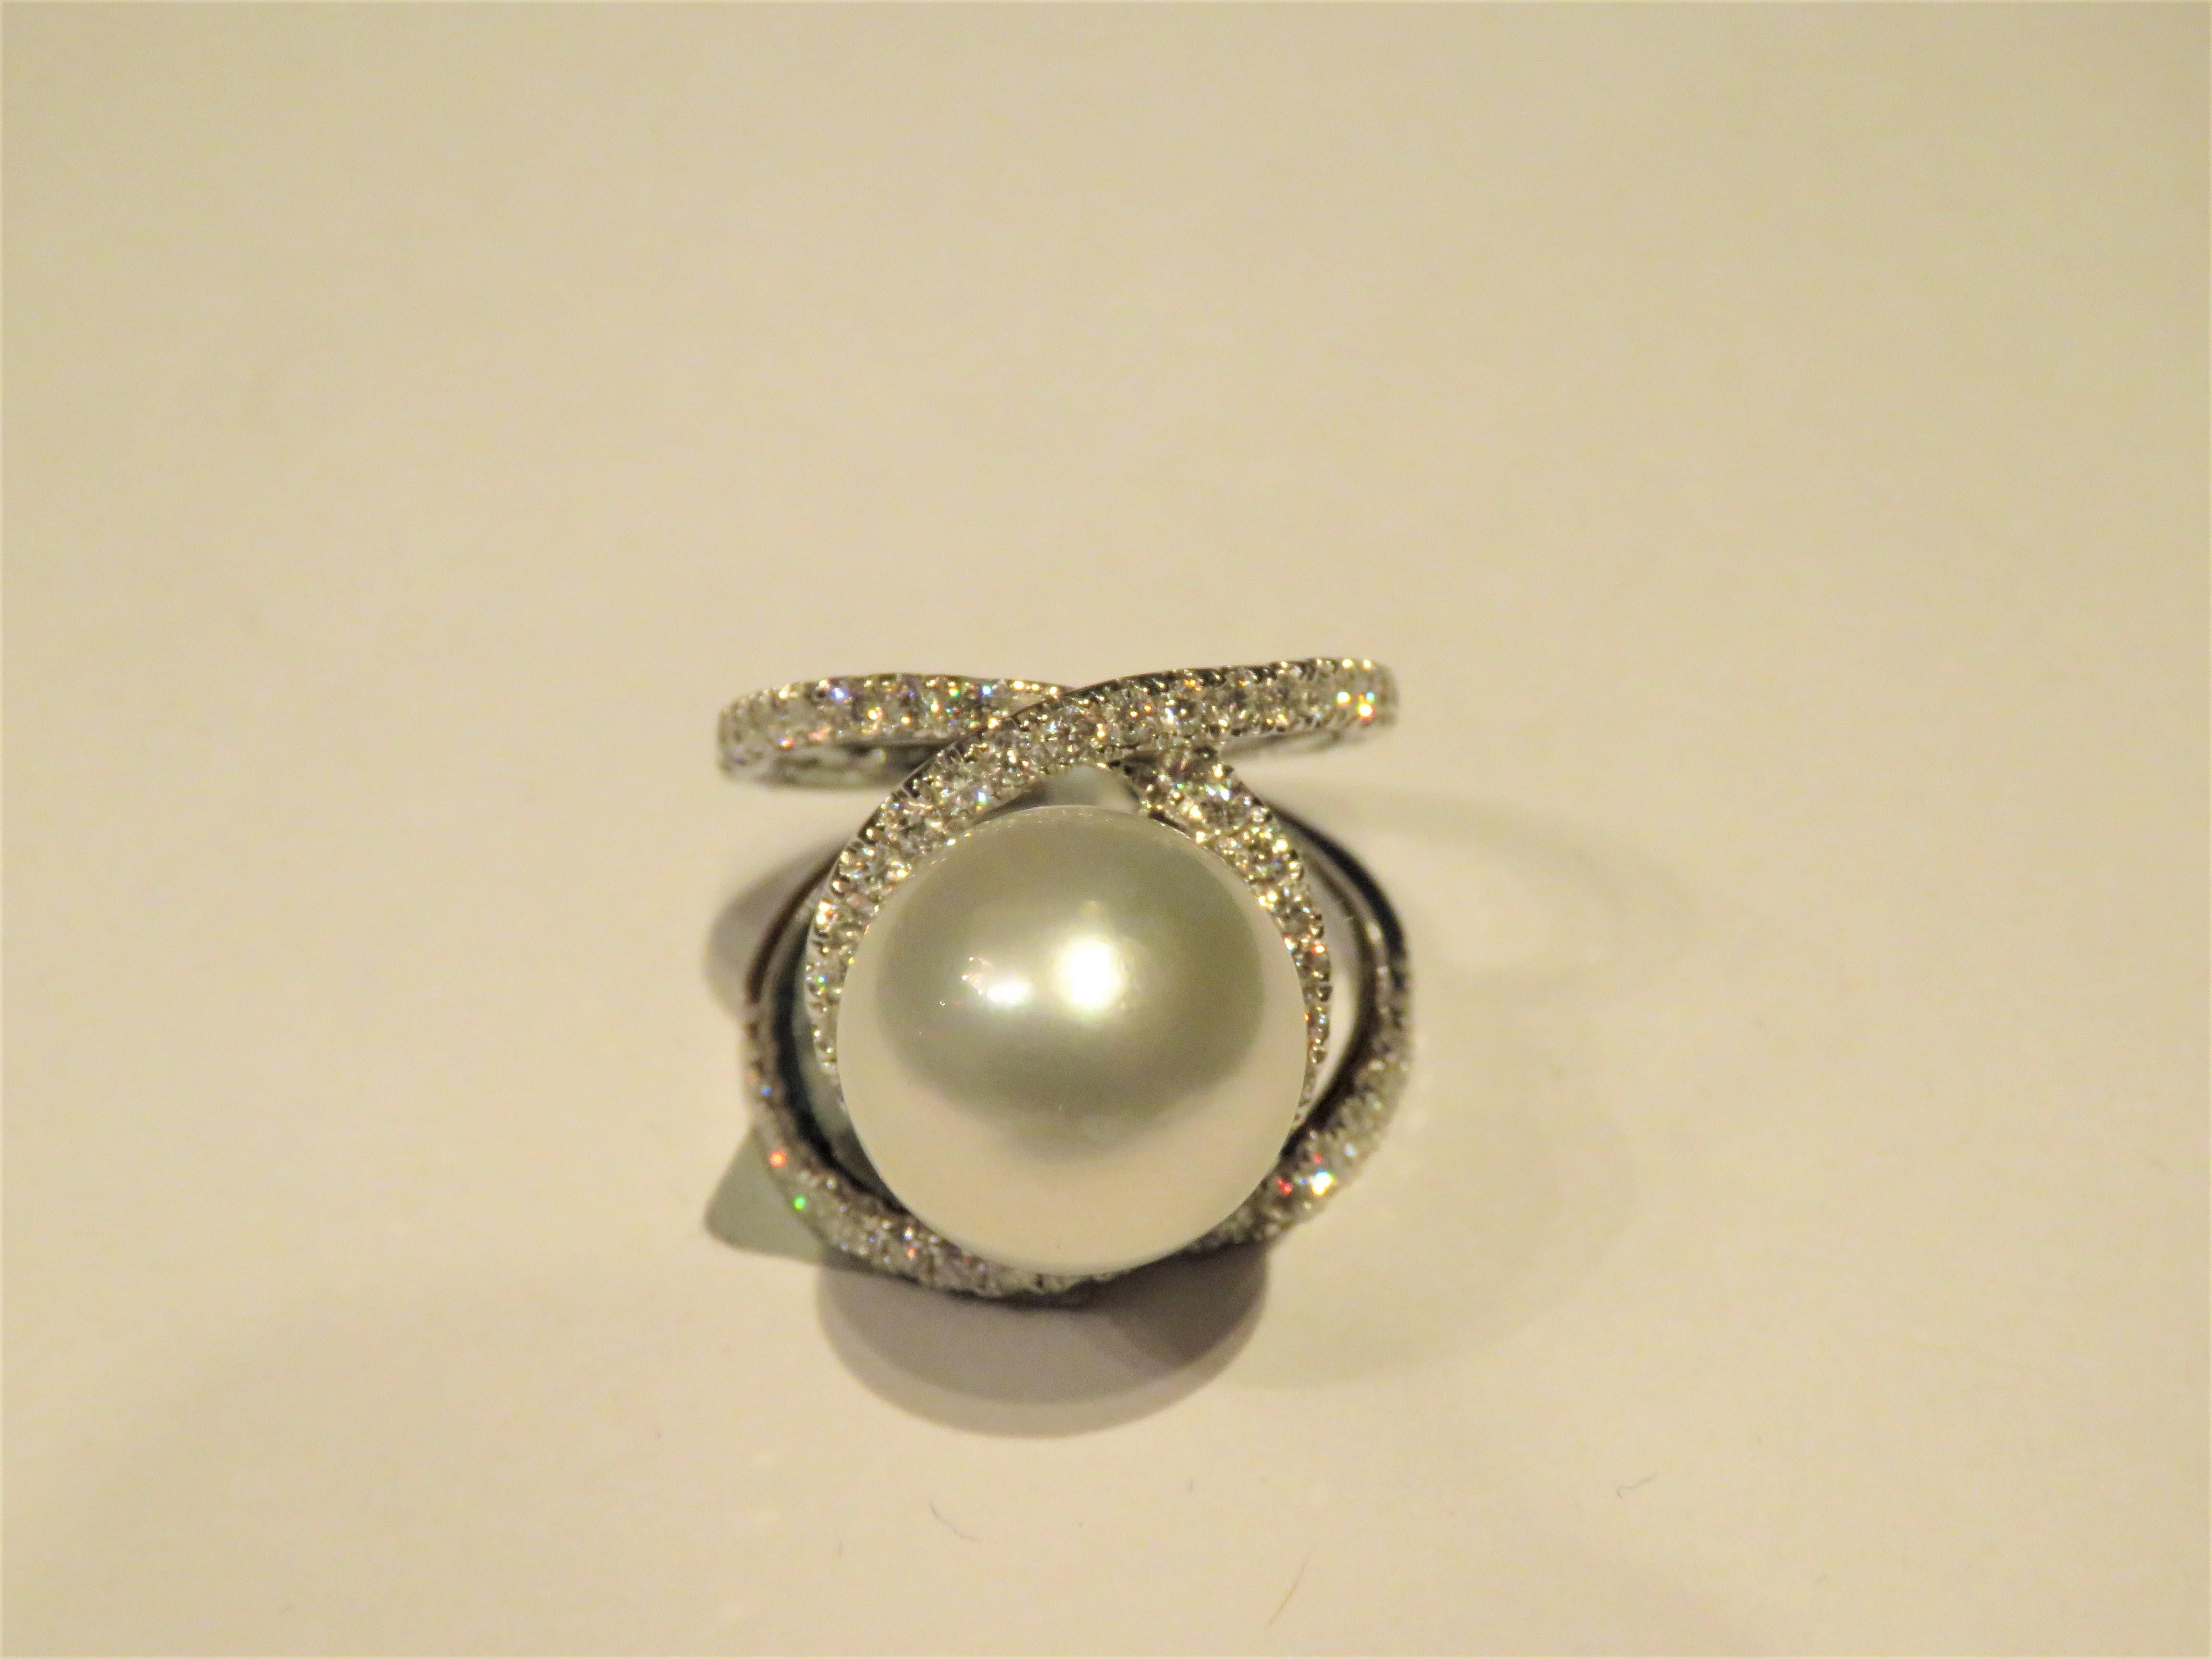 The Following Item we are offering is this Extremely Rare Beautiful 18KT Gold Fine Rare Large South Sea Pearl Famcy Diamond Ring. This Magnificent Ring is comprised of a Rare Fine 13MM-14MM Large South Sea Pearl and Round Gorgeous Glittering